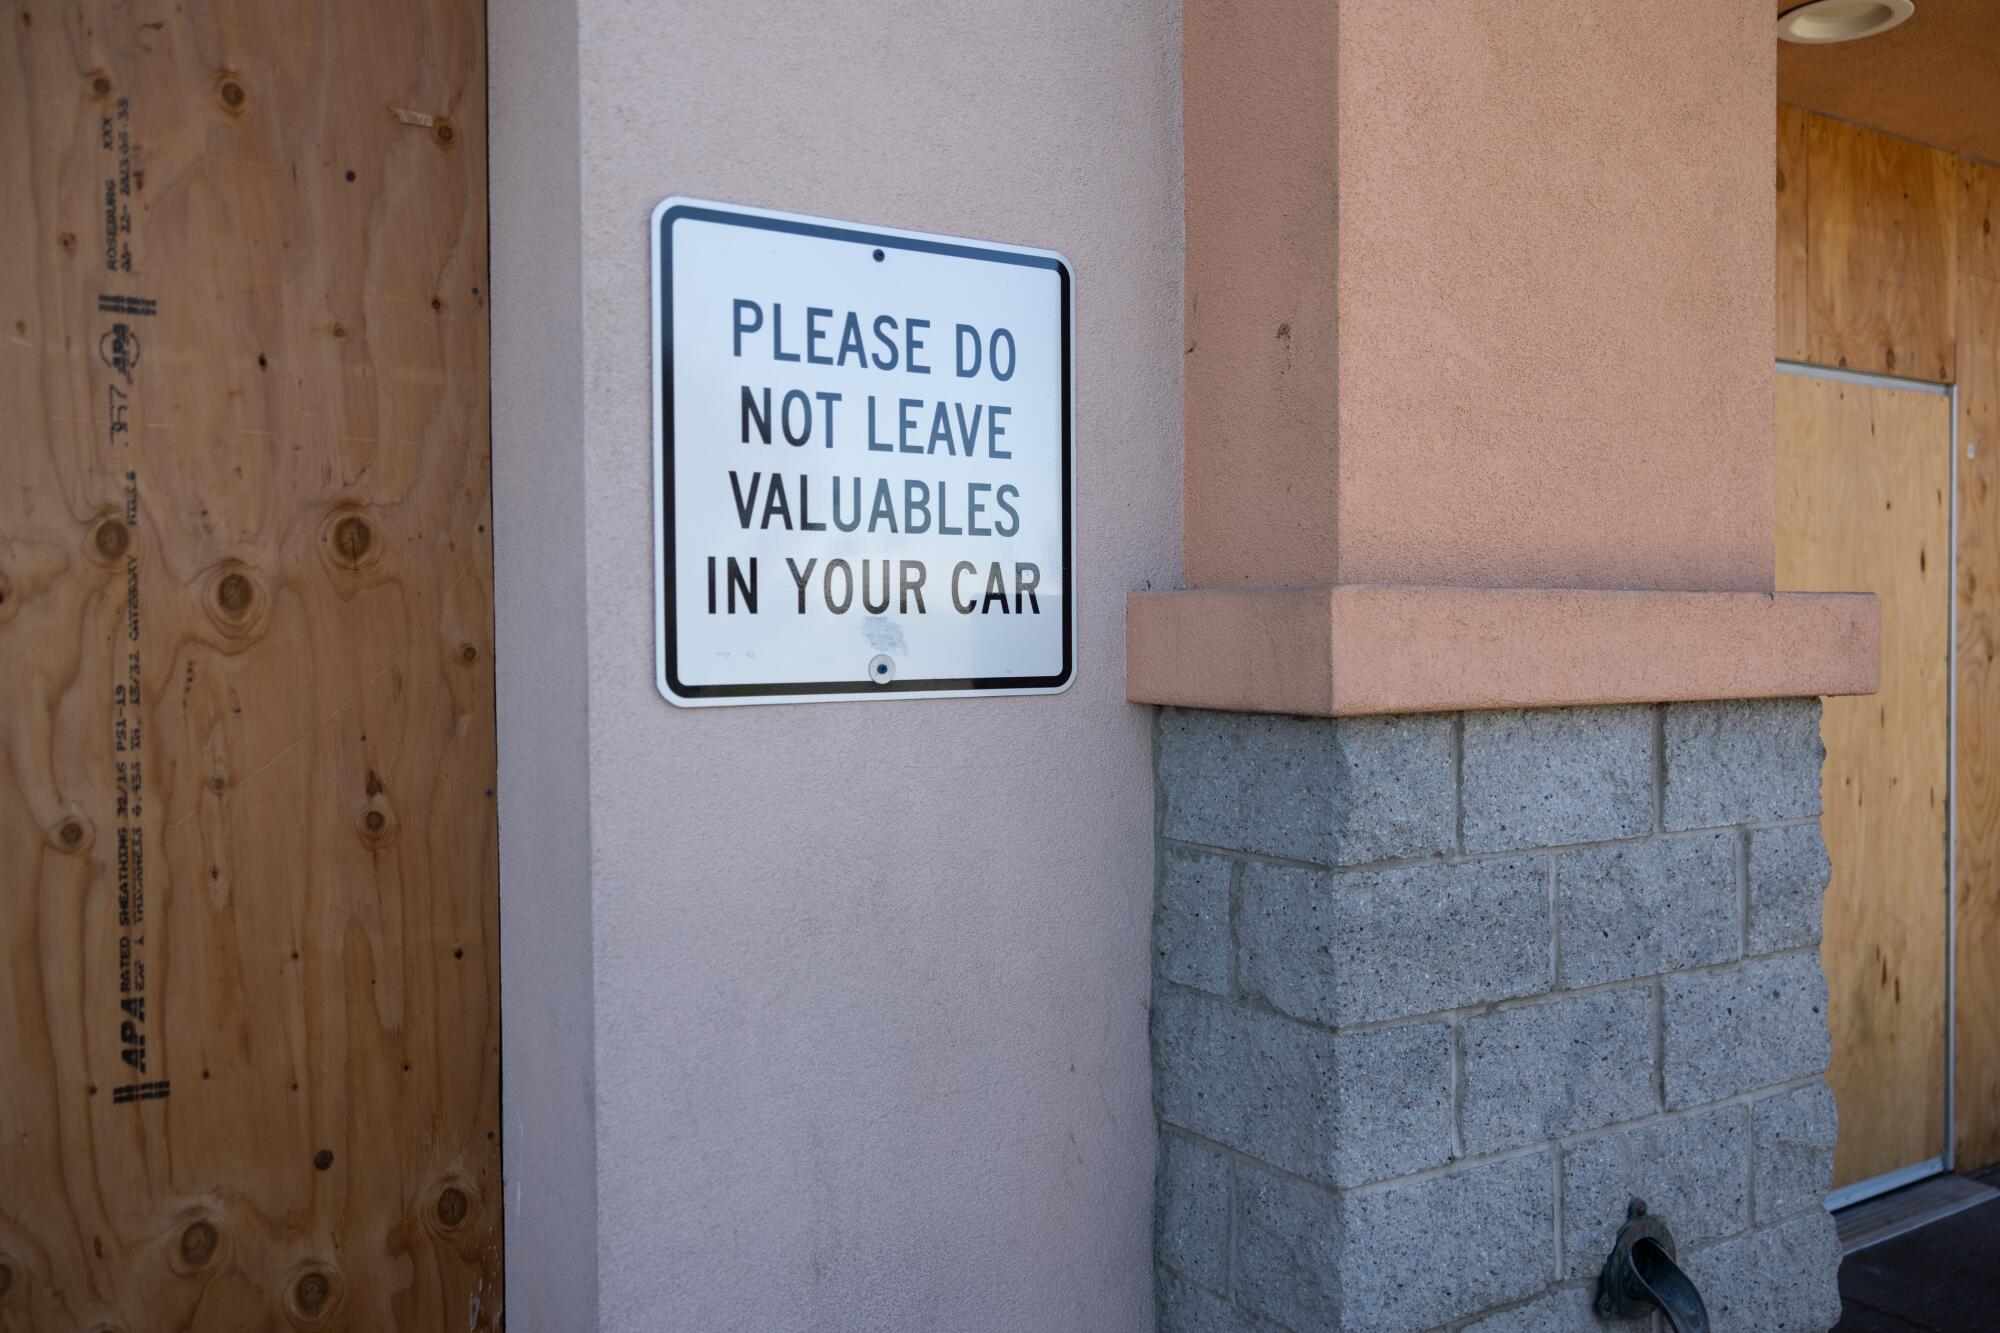 The outside of a boarded-up building, with a sign on the wall reading "Please do not leave valuables in your car."